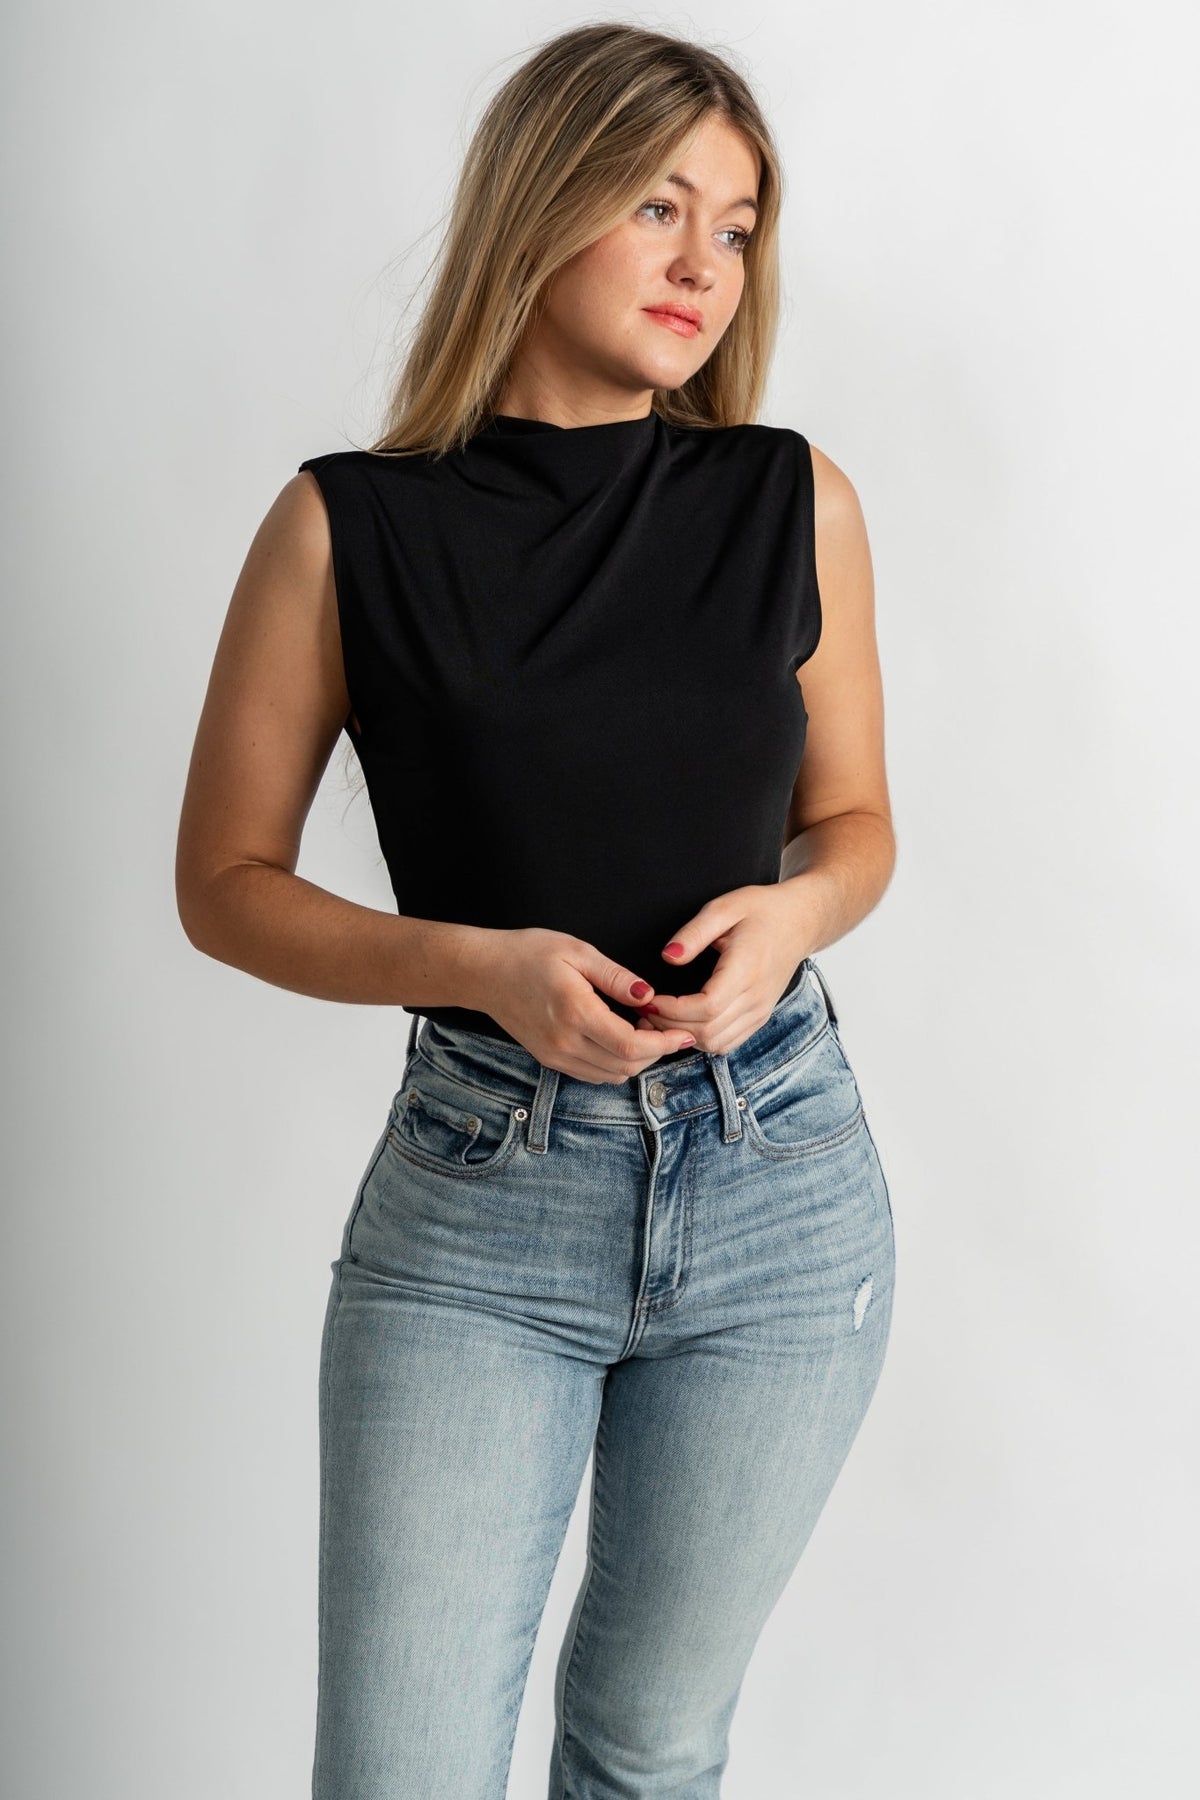 Z Supply Libra shine jersey tank top black - Z Supply - Z Supply Tops, Dresses, Tanks, Tees, Cardigans, Joggers and Loungewear at Lush Fashion Lounge